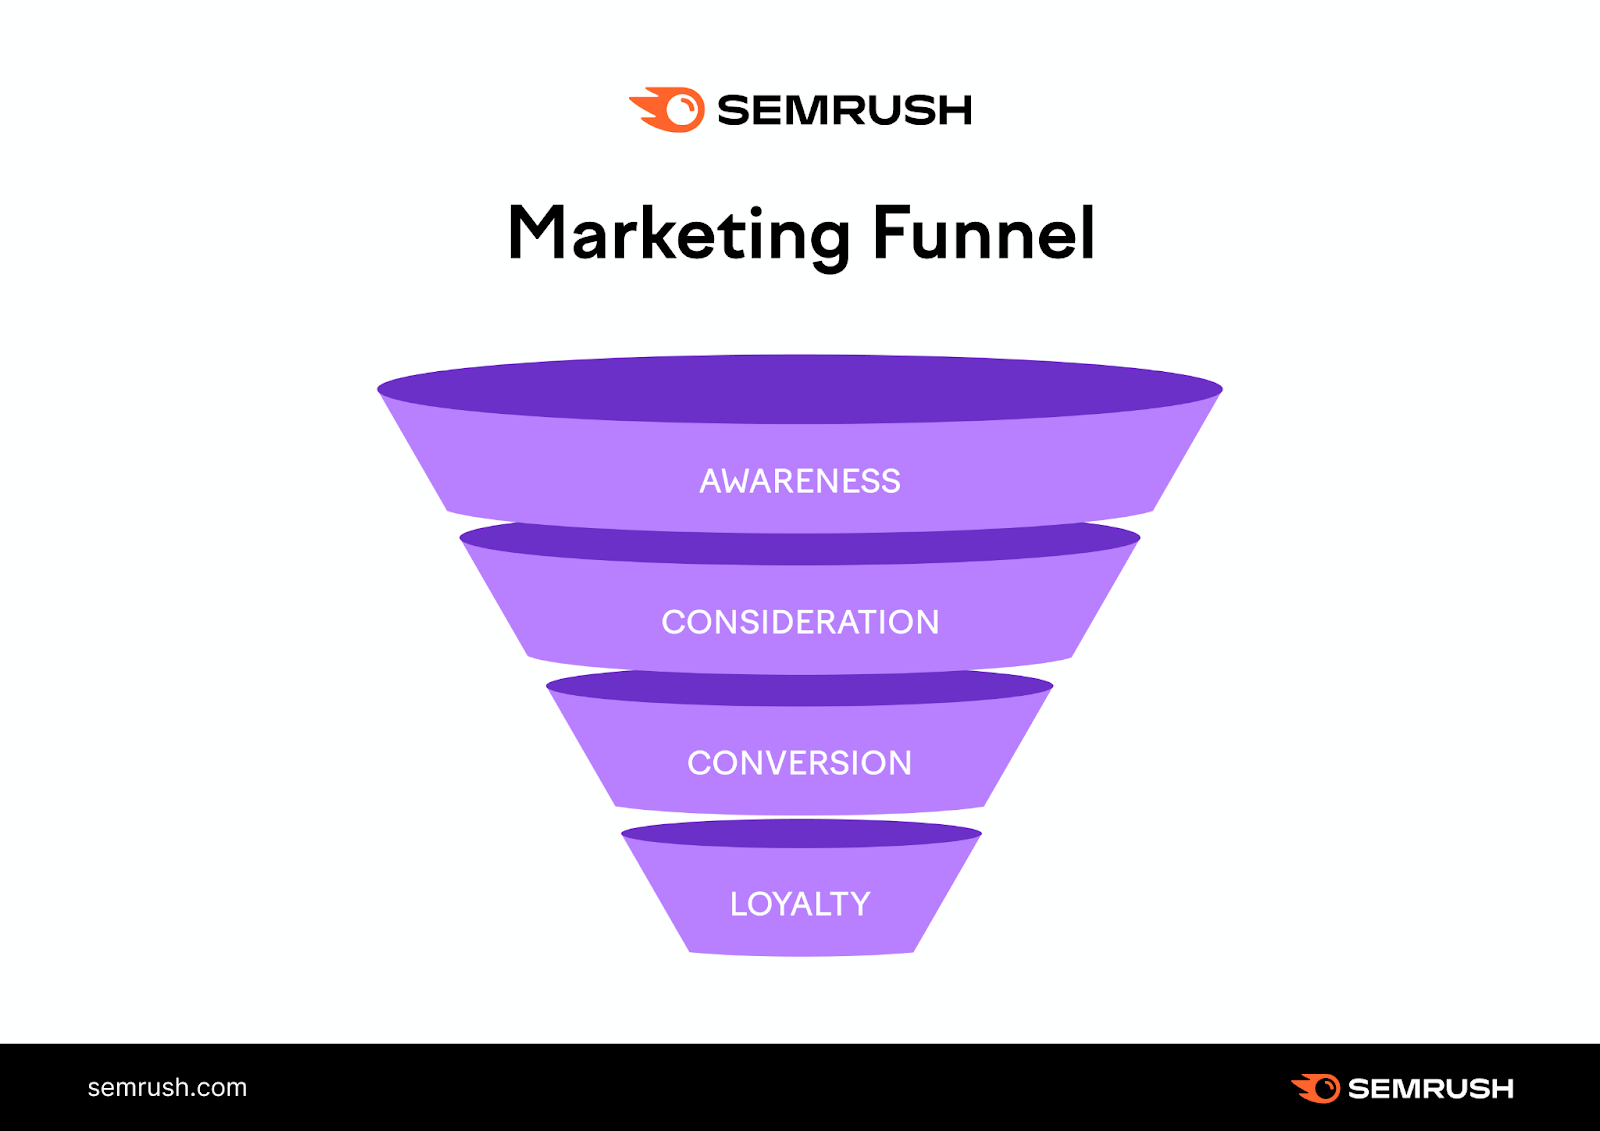 A visual of marketing funnel, with awareness, consideration, conversion, and loyalty stages